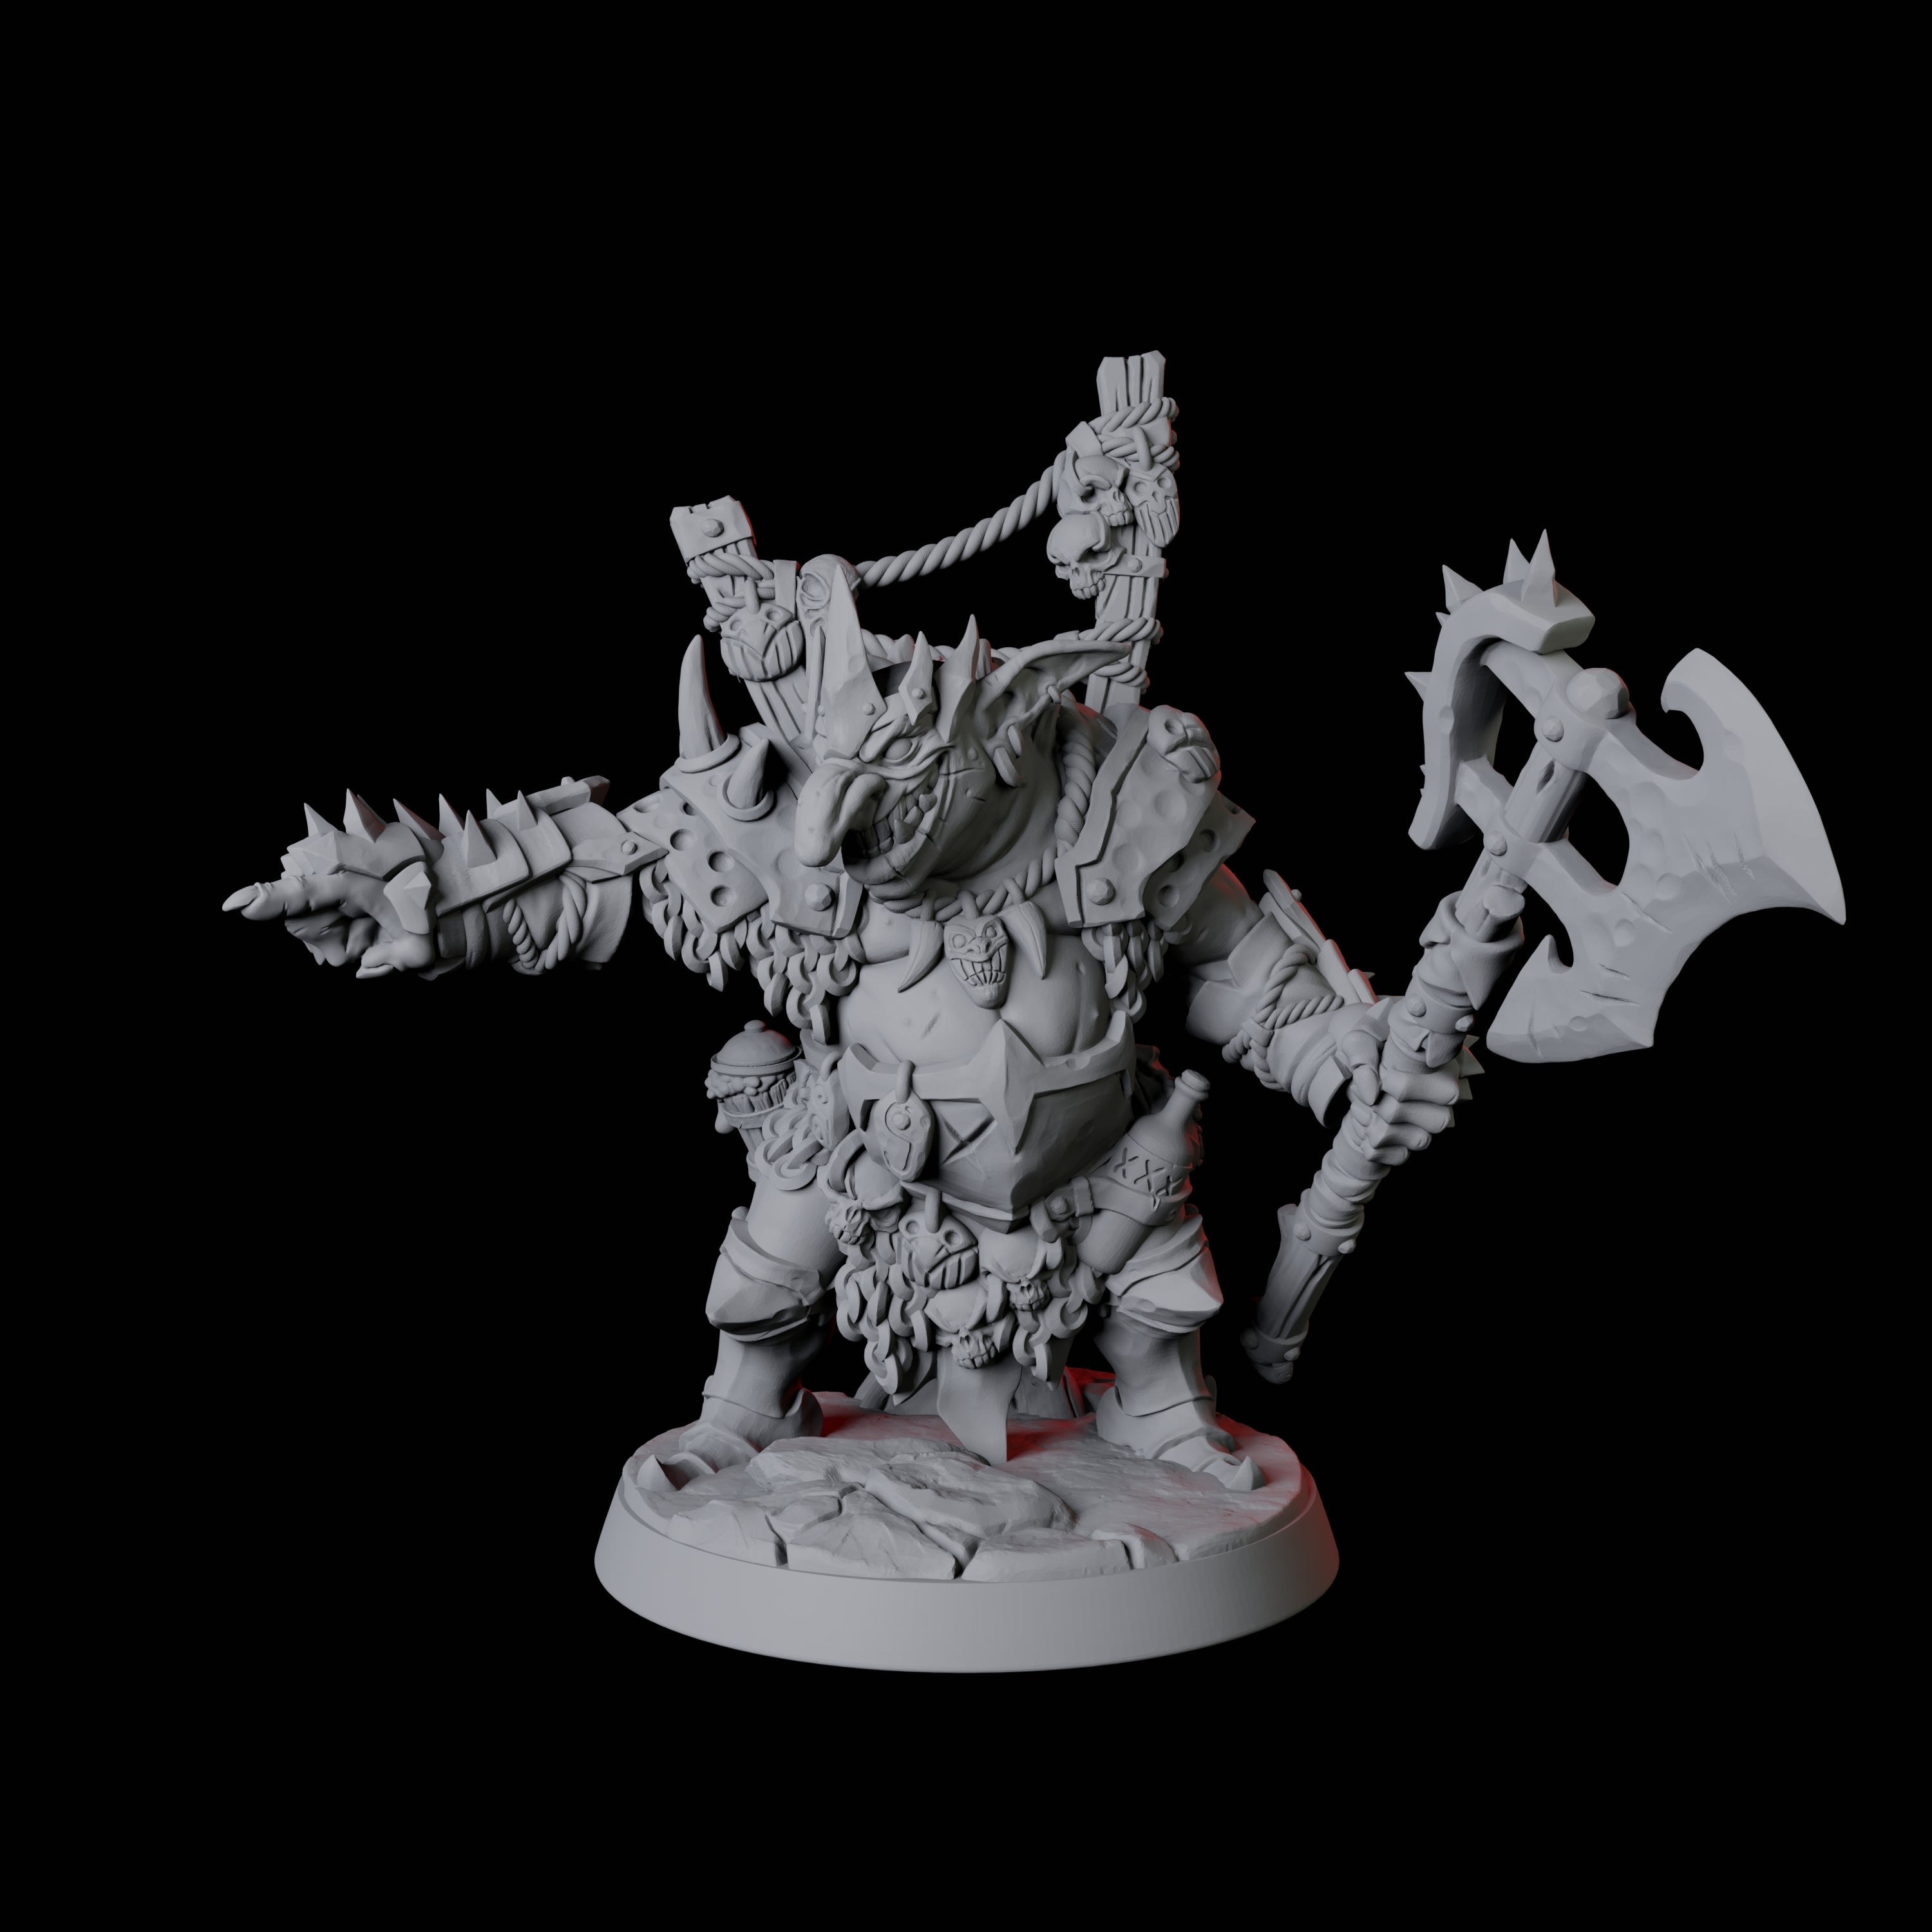 Pointing Goblin Leader Miniature for Dungeons and Dragons, Pathfinder or other TTRPGs